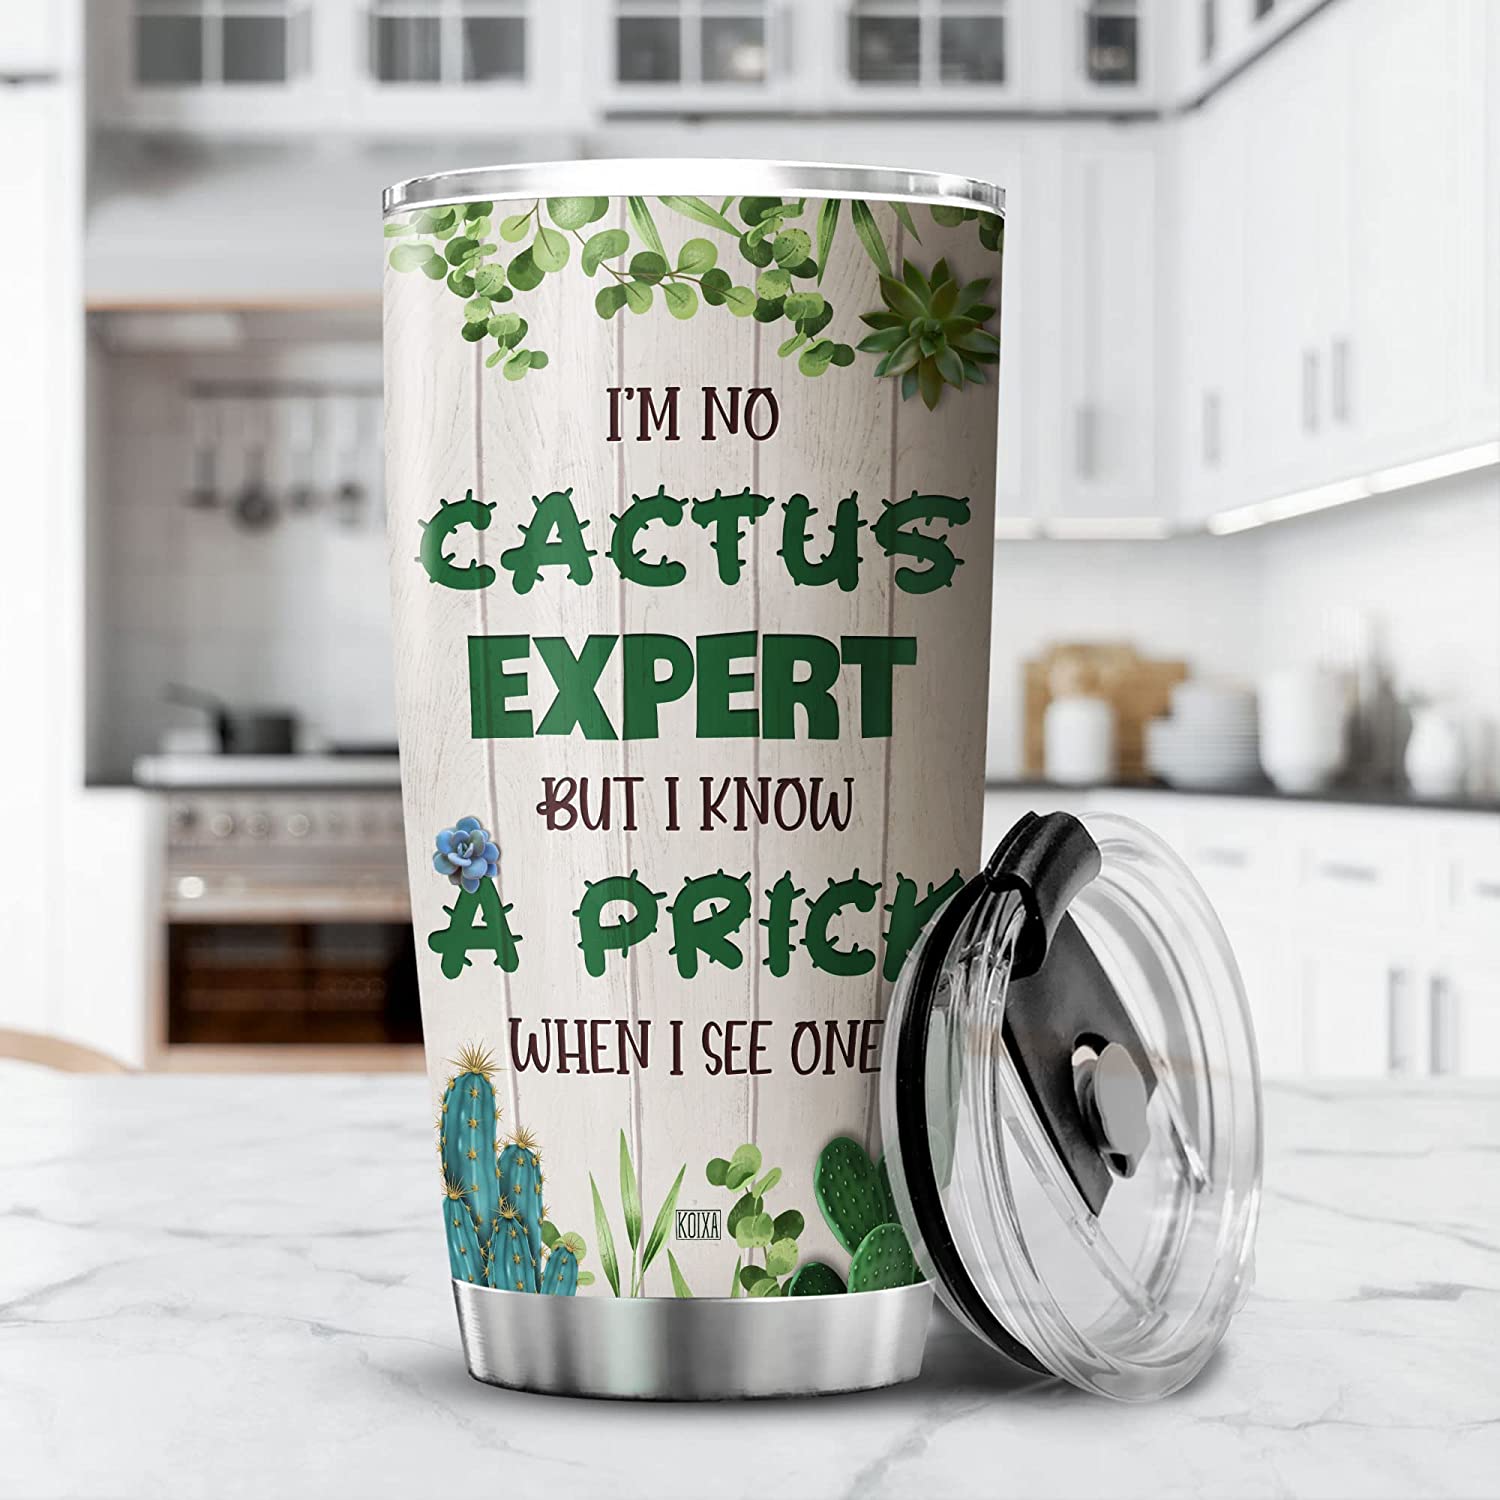 Where can I buy this Giftworks Cactus Measuring Cups, I can't find anything  on Giftworks except for a software company. : r/wherecanibuythis